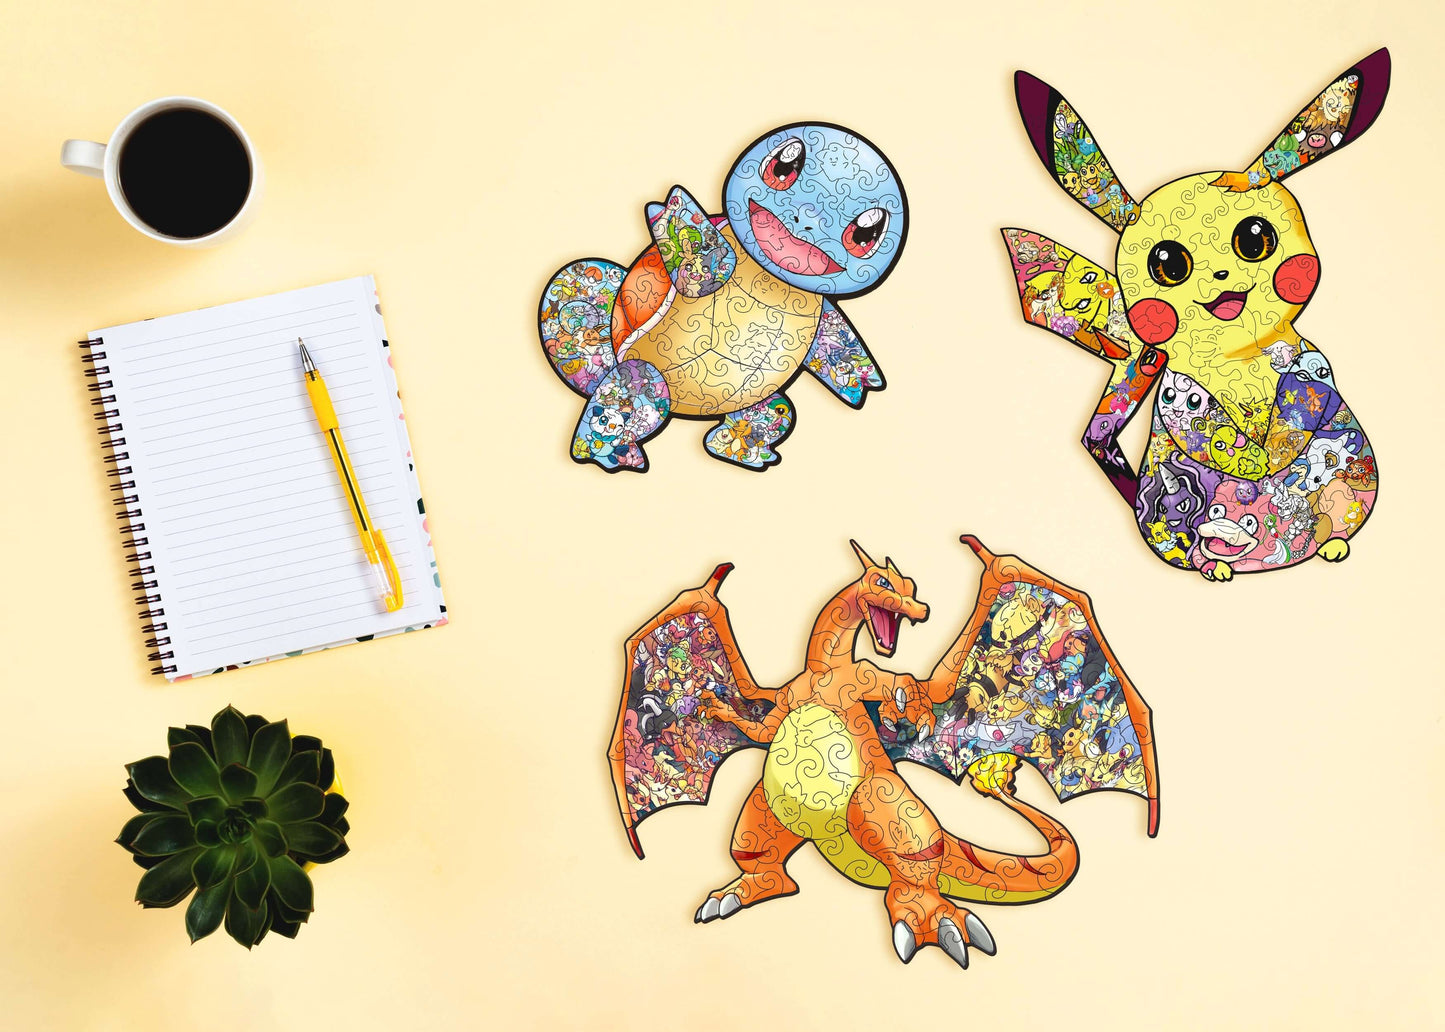 Pikachu, Squirtle & Charizard Wooden Puzzles Pack Active Puzzles